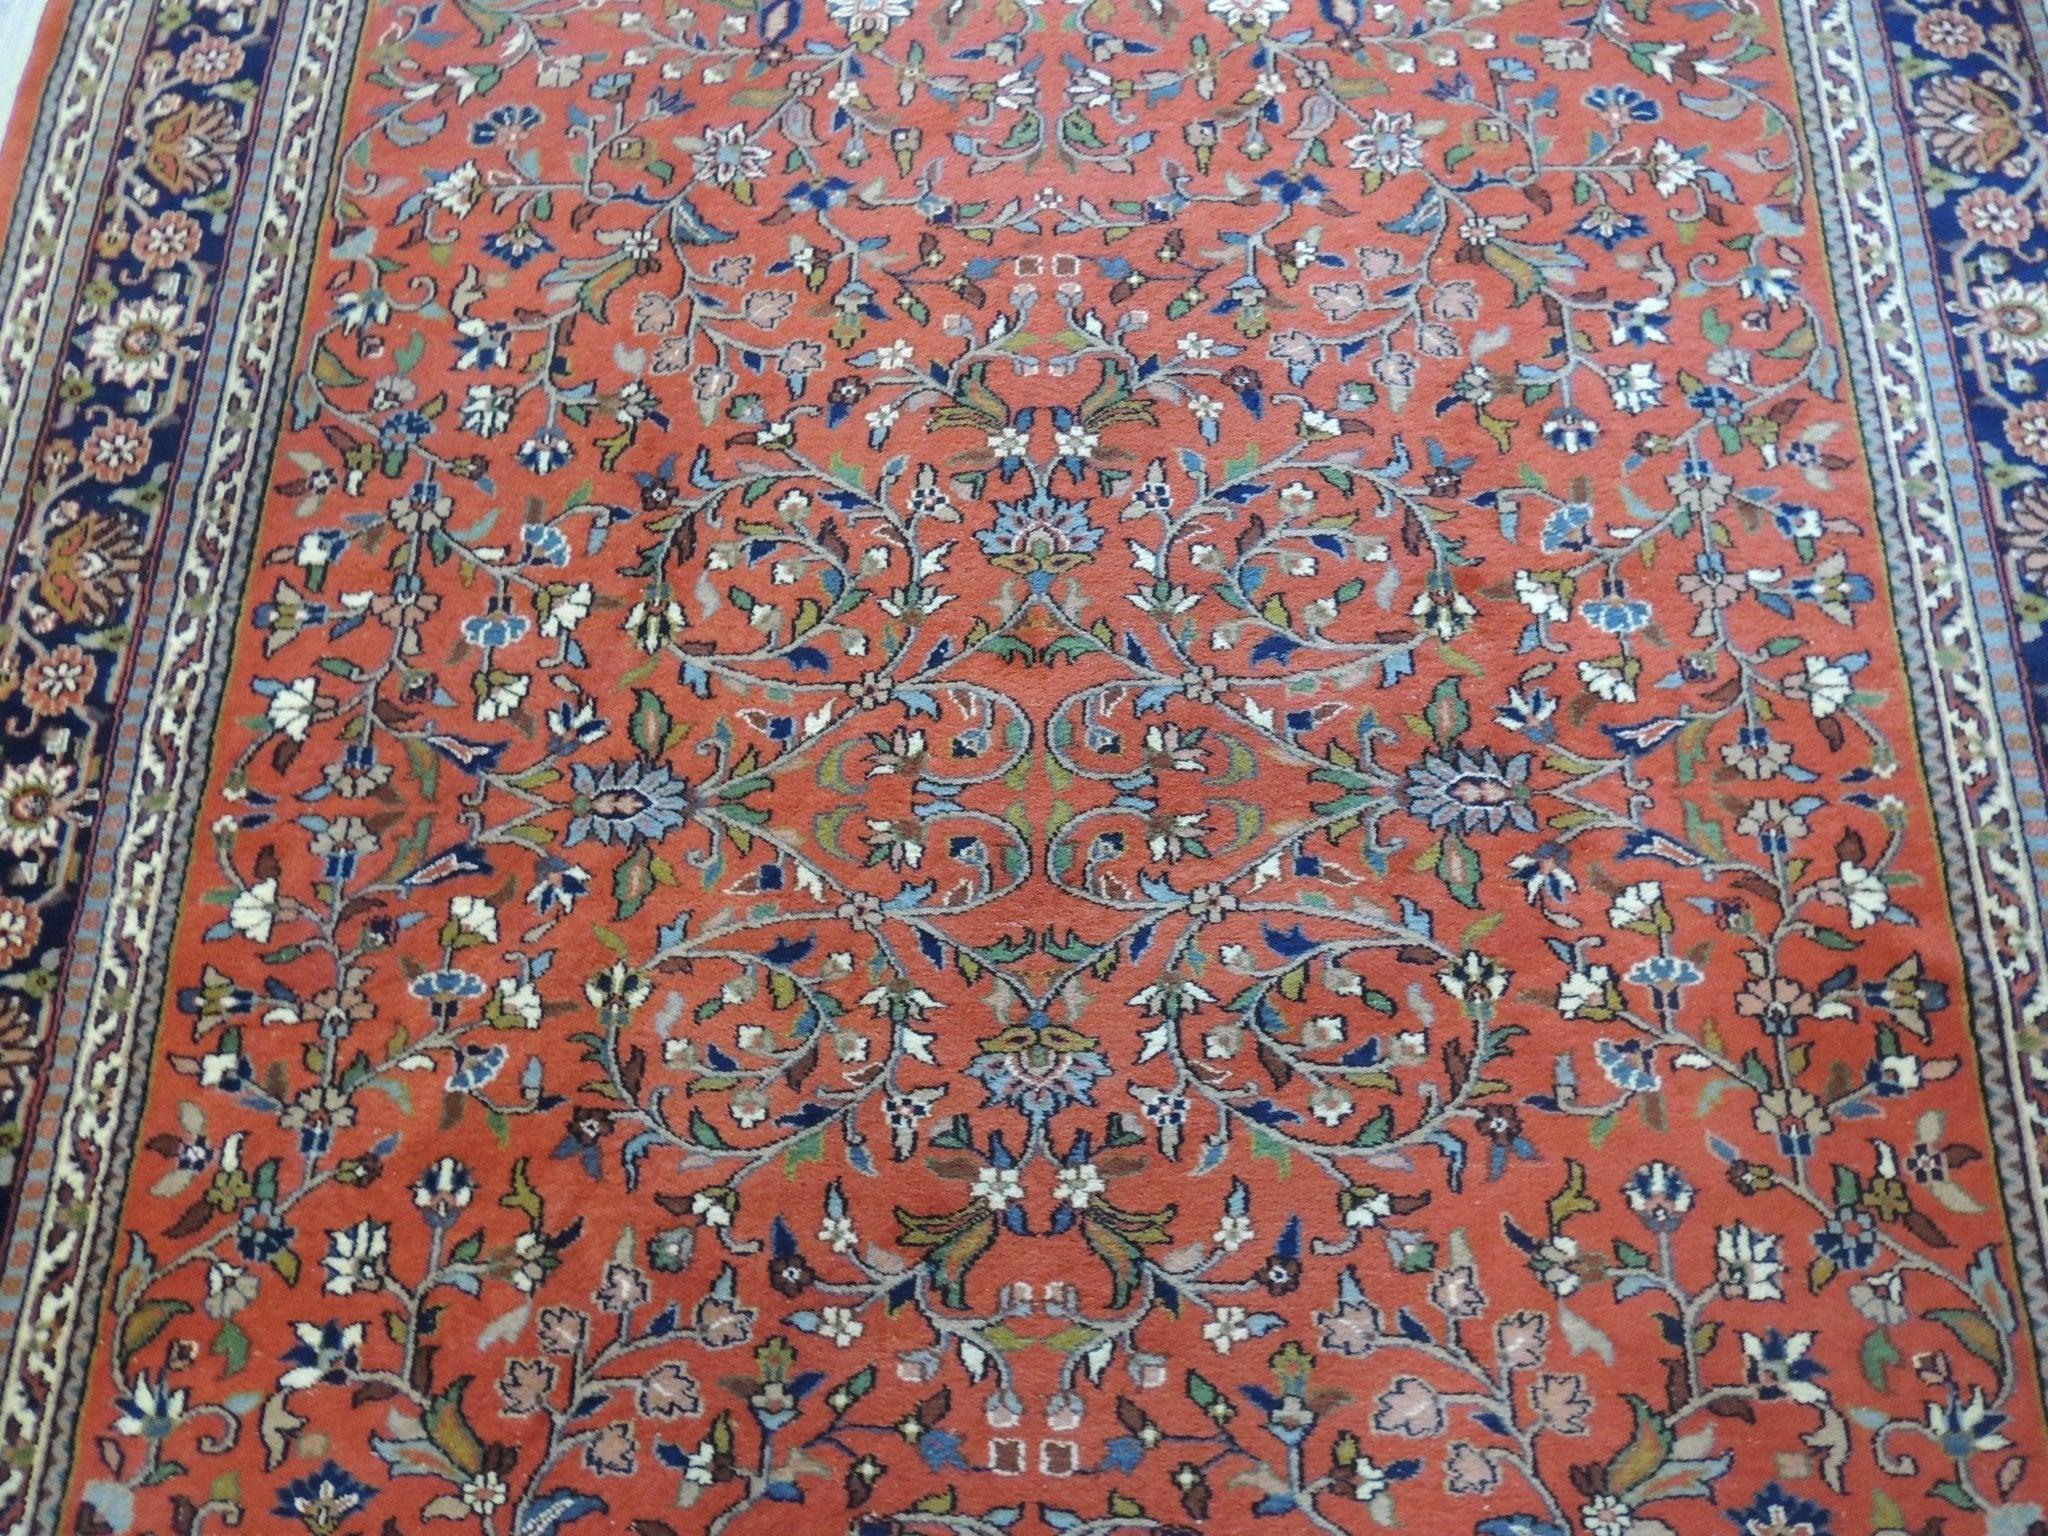 Exquisite Vintage Hand-Knotted Indo-Persian Rug 11x8 Ft